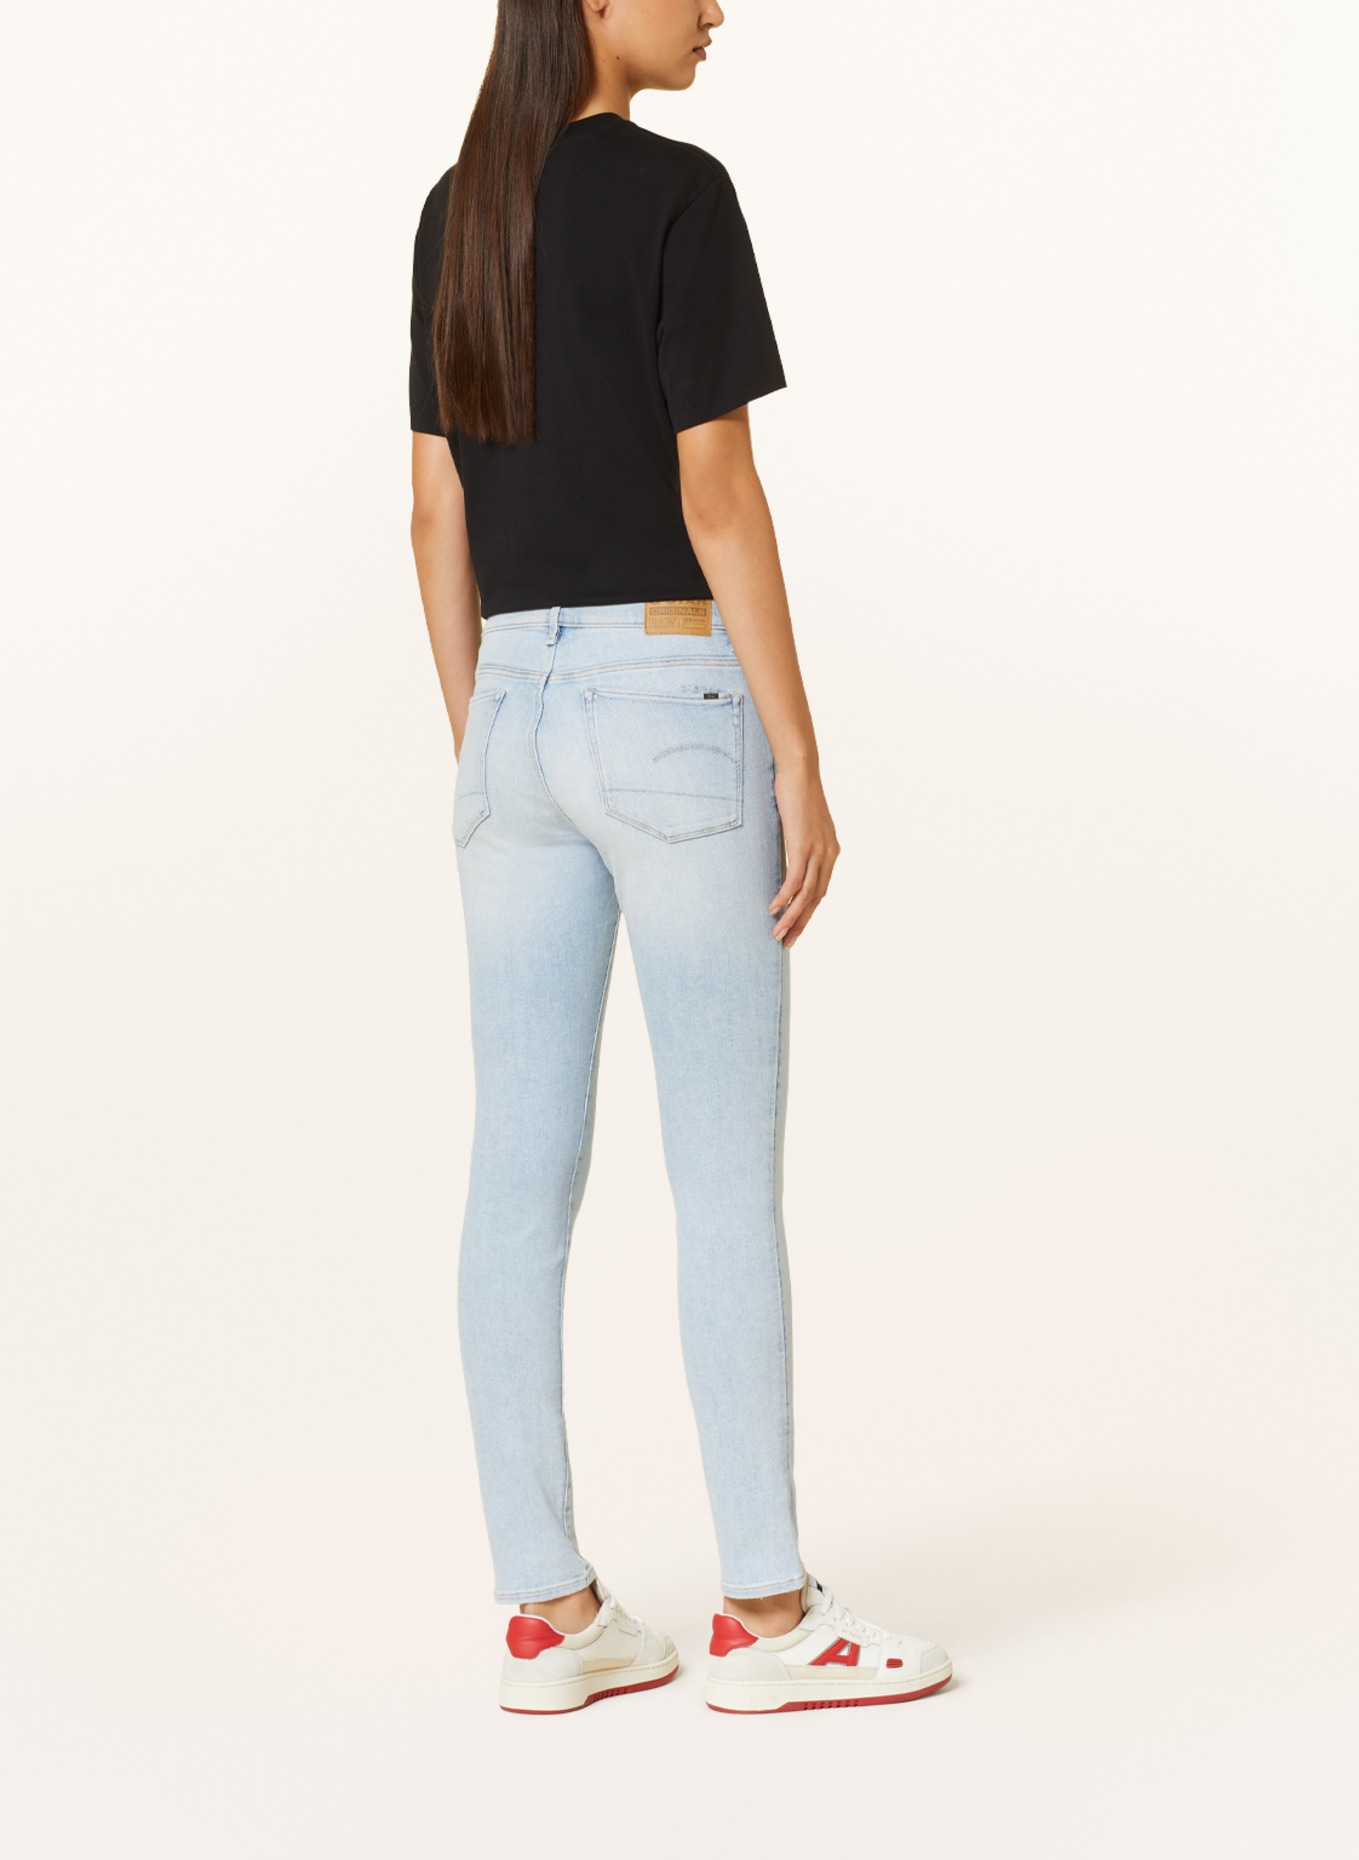 G-Star RAW Skinny jeans 3301, Color: G307 sun faded bluejay (Image 3)